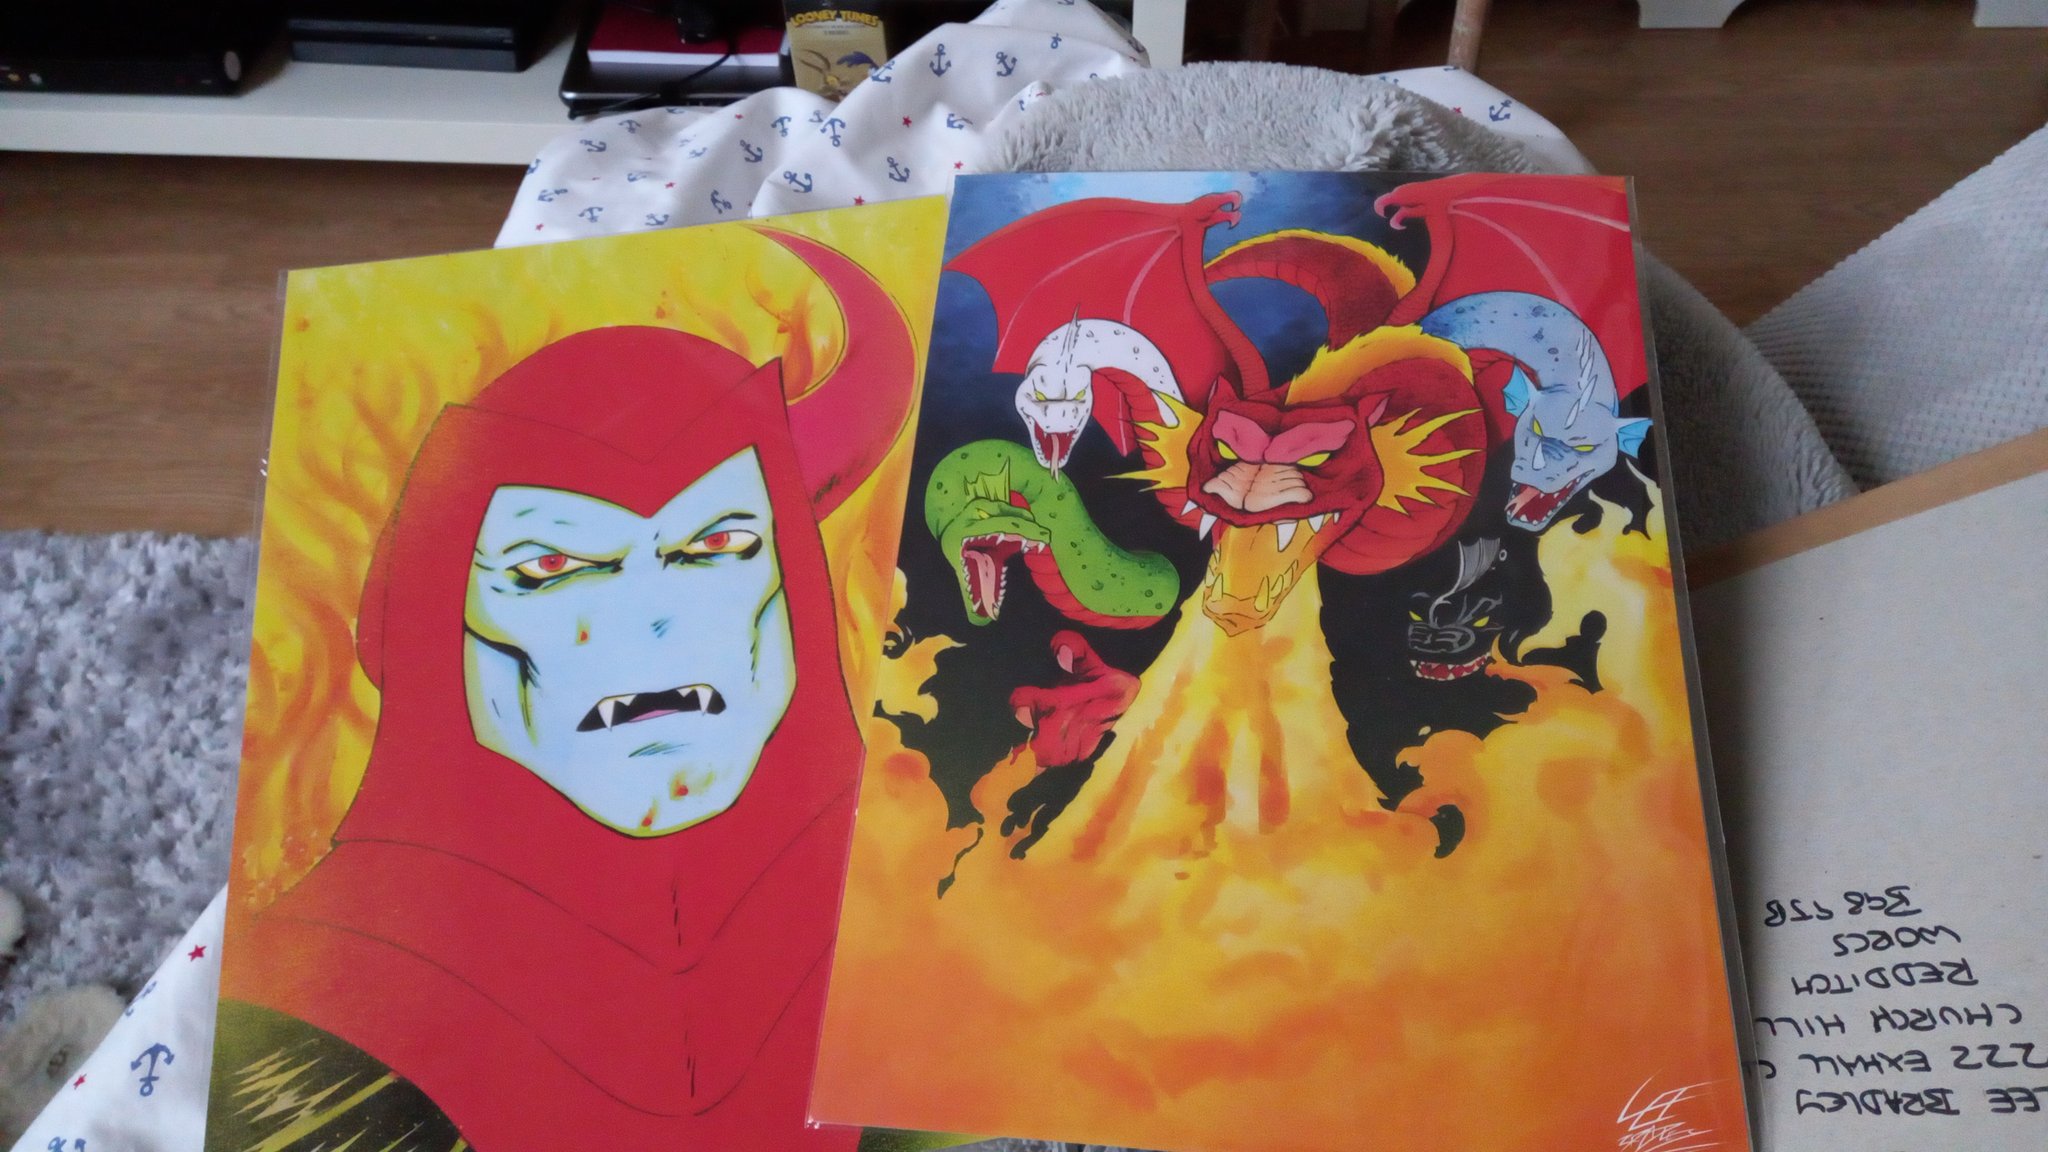 Pizarro's Pieces on X: Picked up this great #bravestarr 30/30